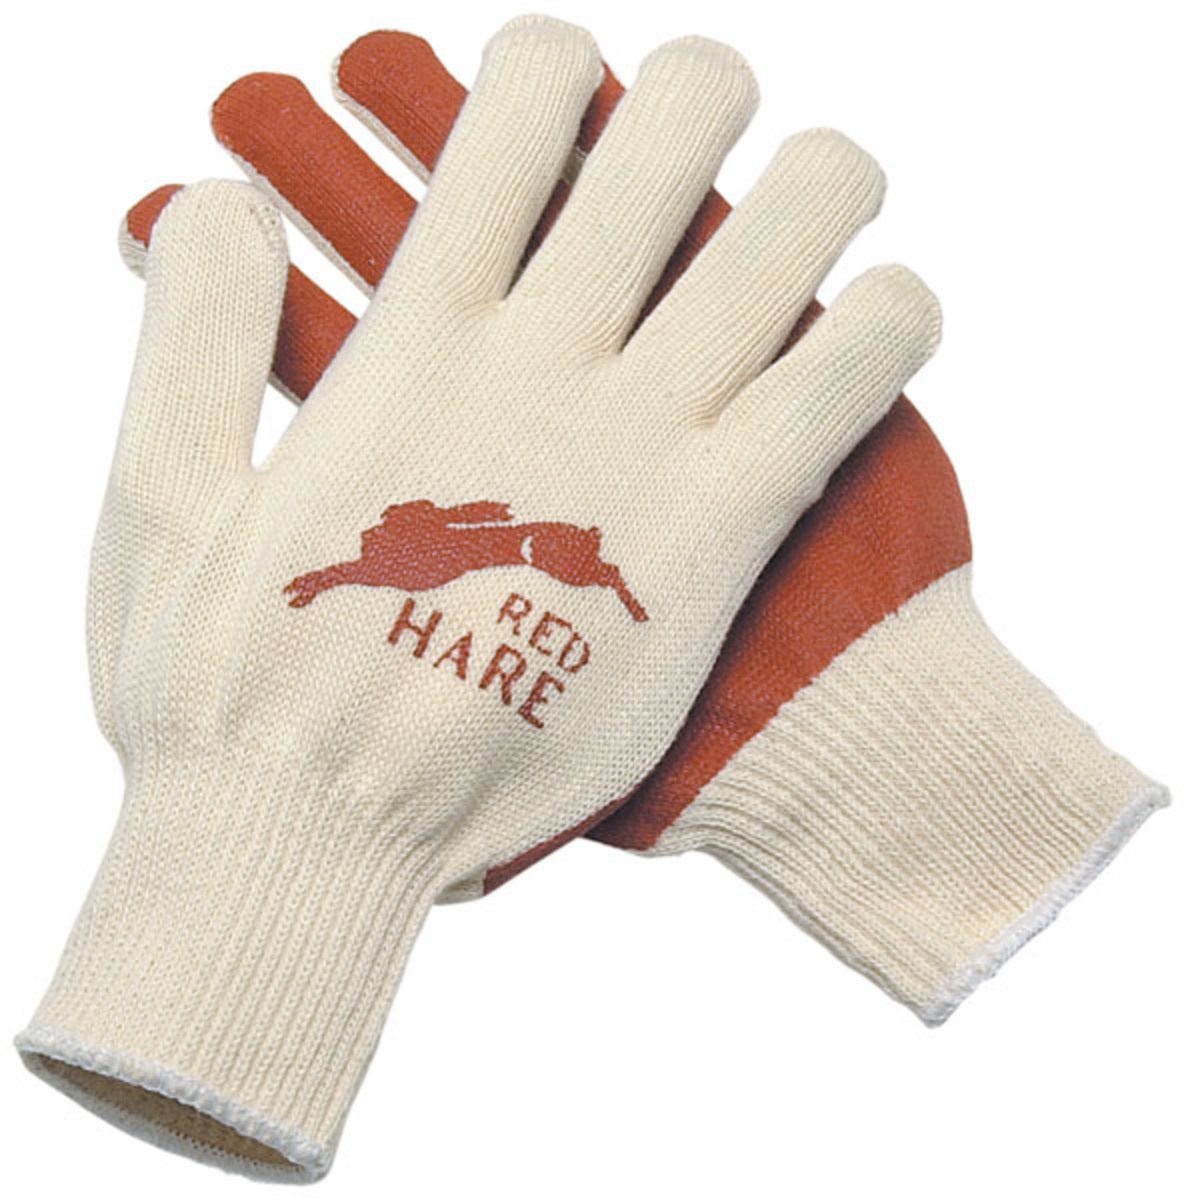 MCR Safety® Large Red Hare® 10 Gauge Russet Nitrile Palm Dipped Coating Work Gloves With Natural Cotton Liner And Knit Wrist